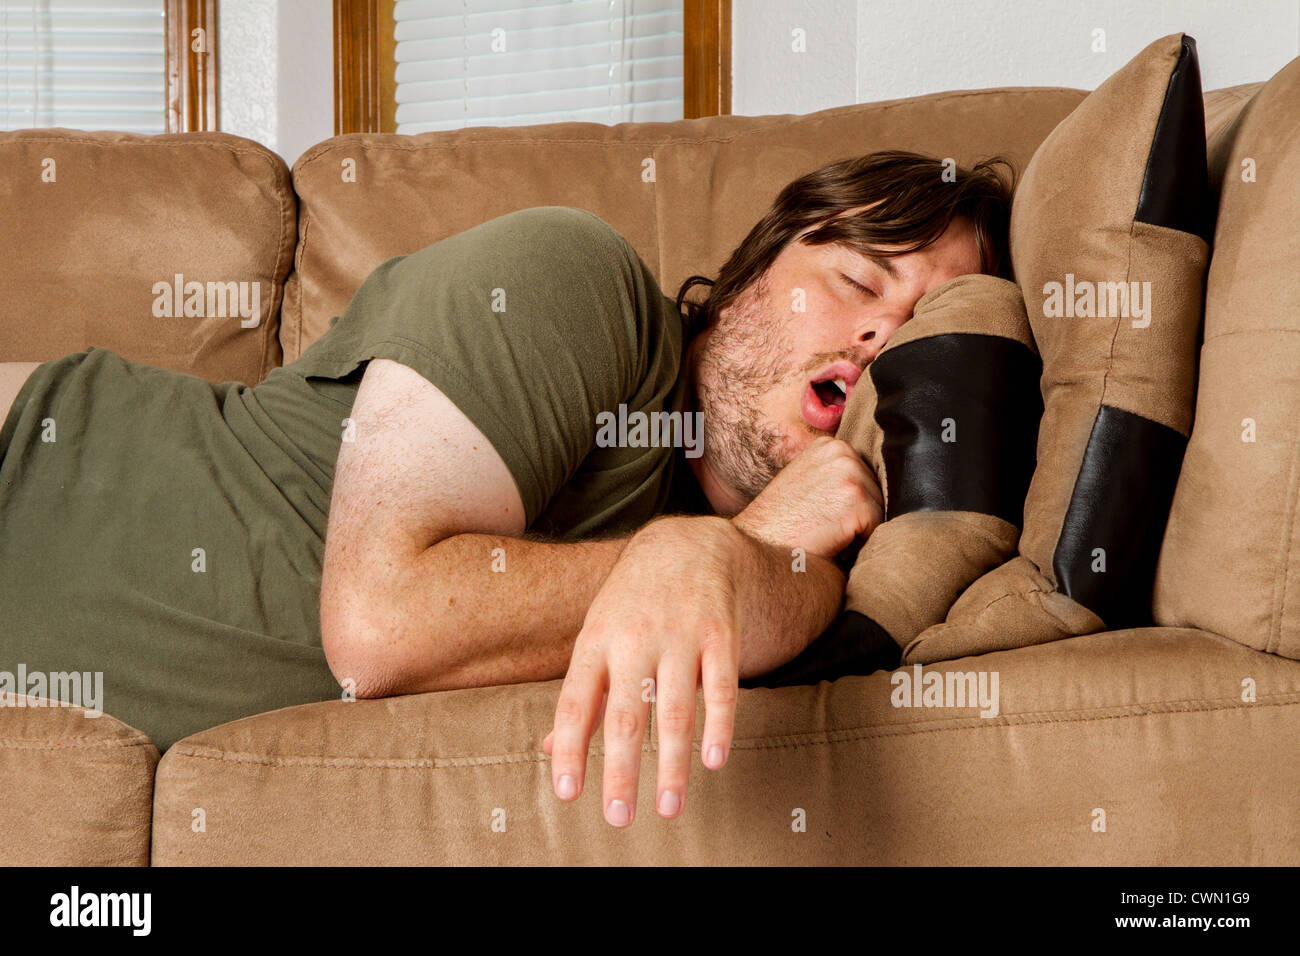 He is asleep mouth open and arm just flung over the side of the couch. Stock Photo